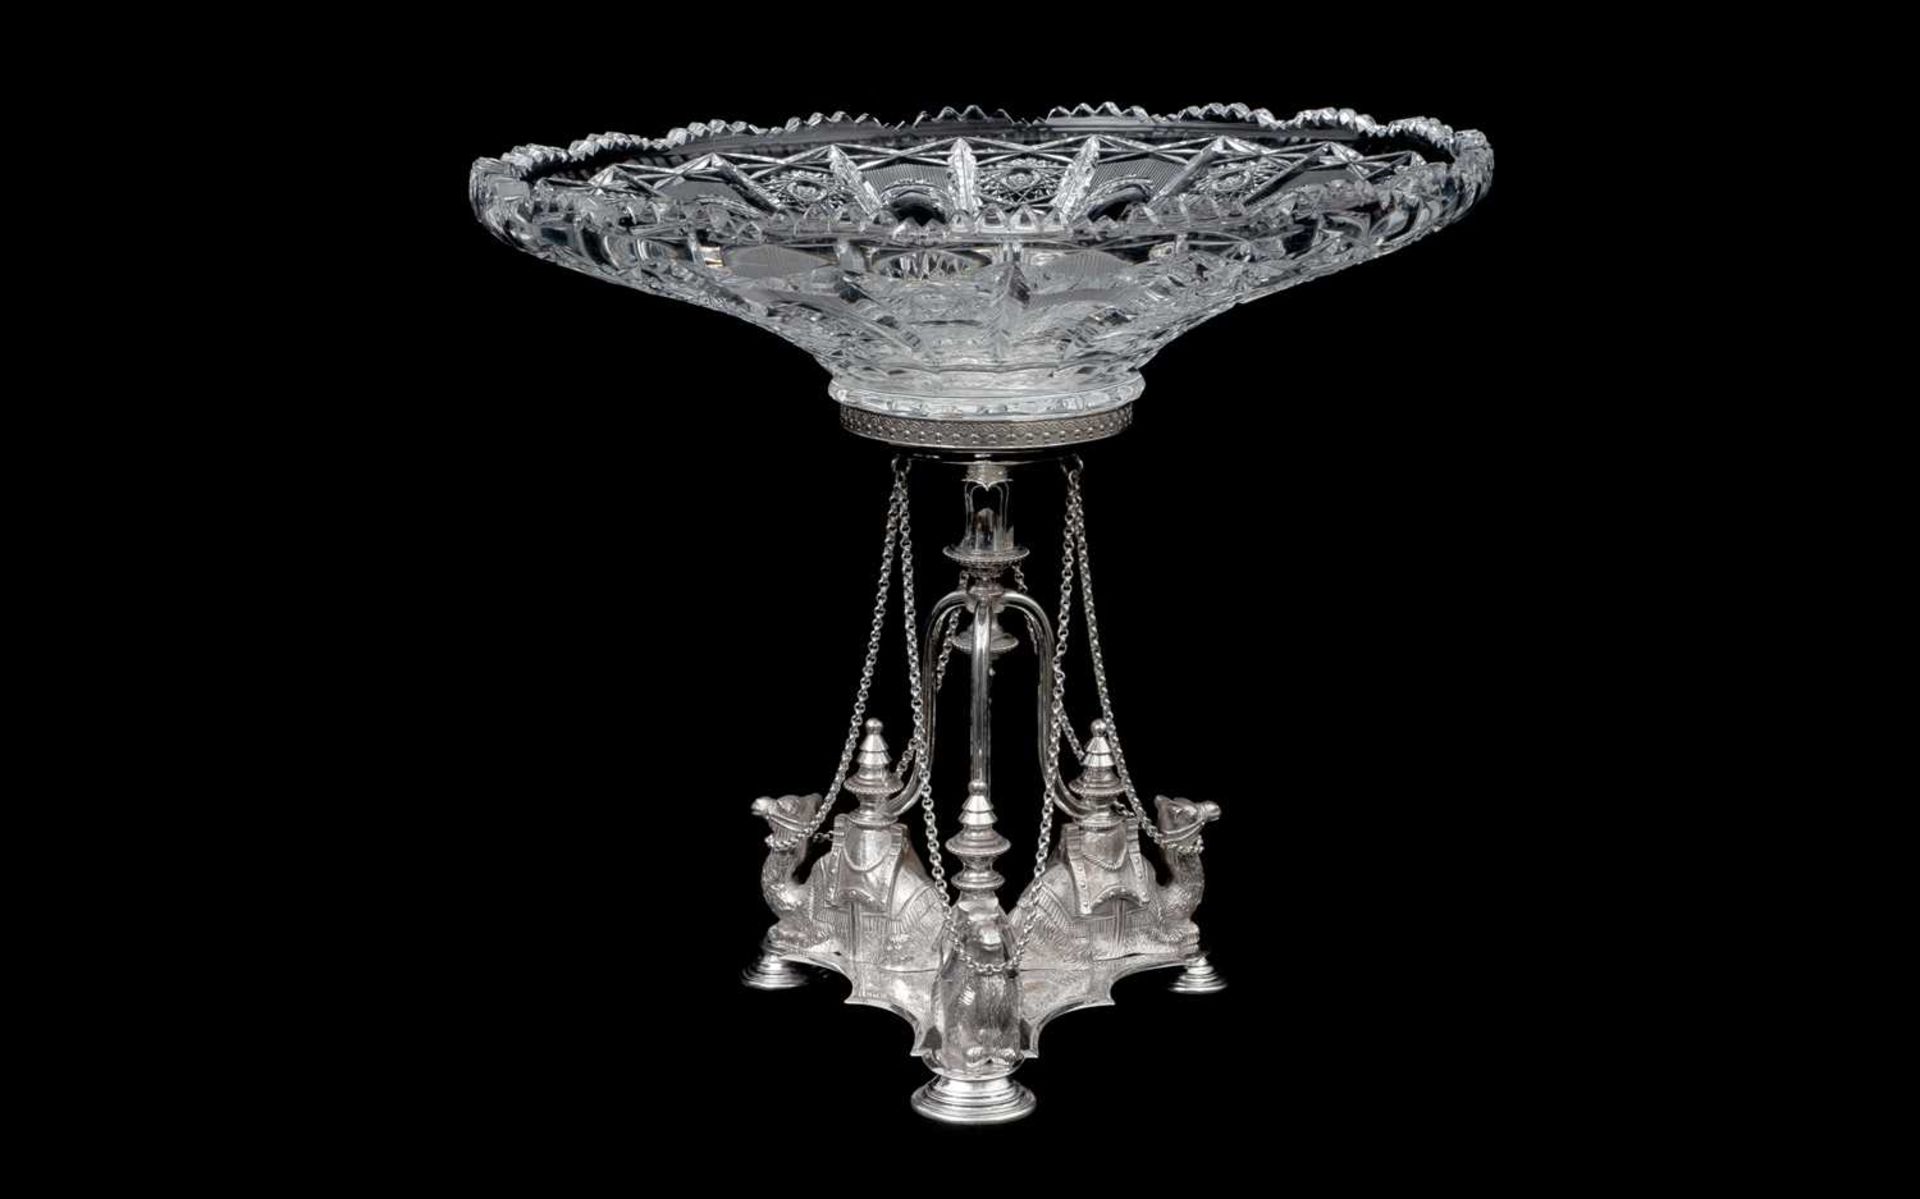 ATTRIBUTED TO ELKINGTON: A LATE 19TH CENTURY SILVER PLATED EGYPTIAN REVIVAL CENTREPIECE